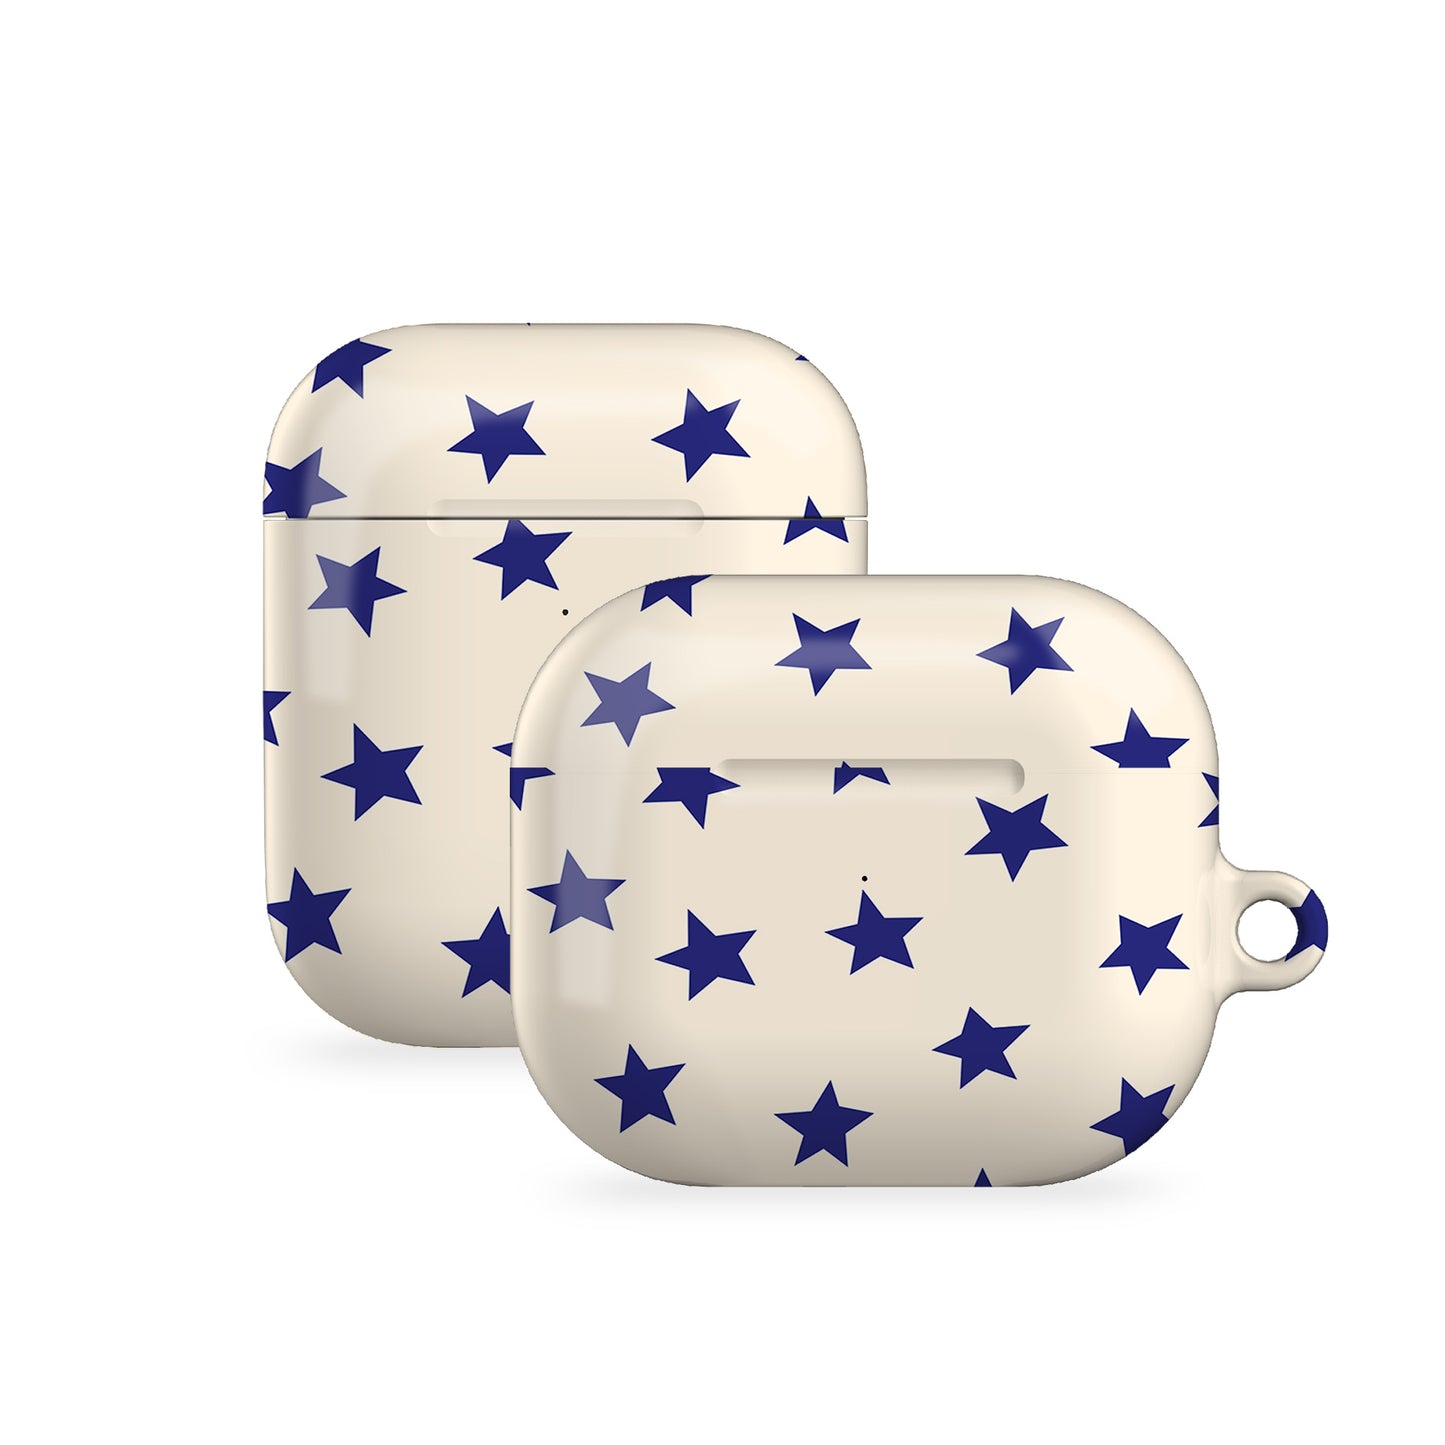 Tiny Blue Stars AirPods Case Cover